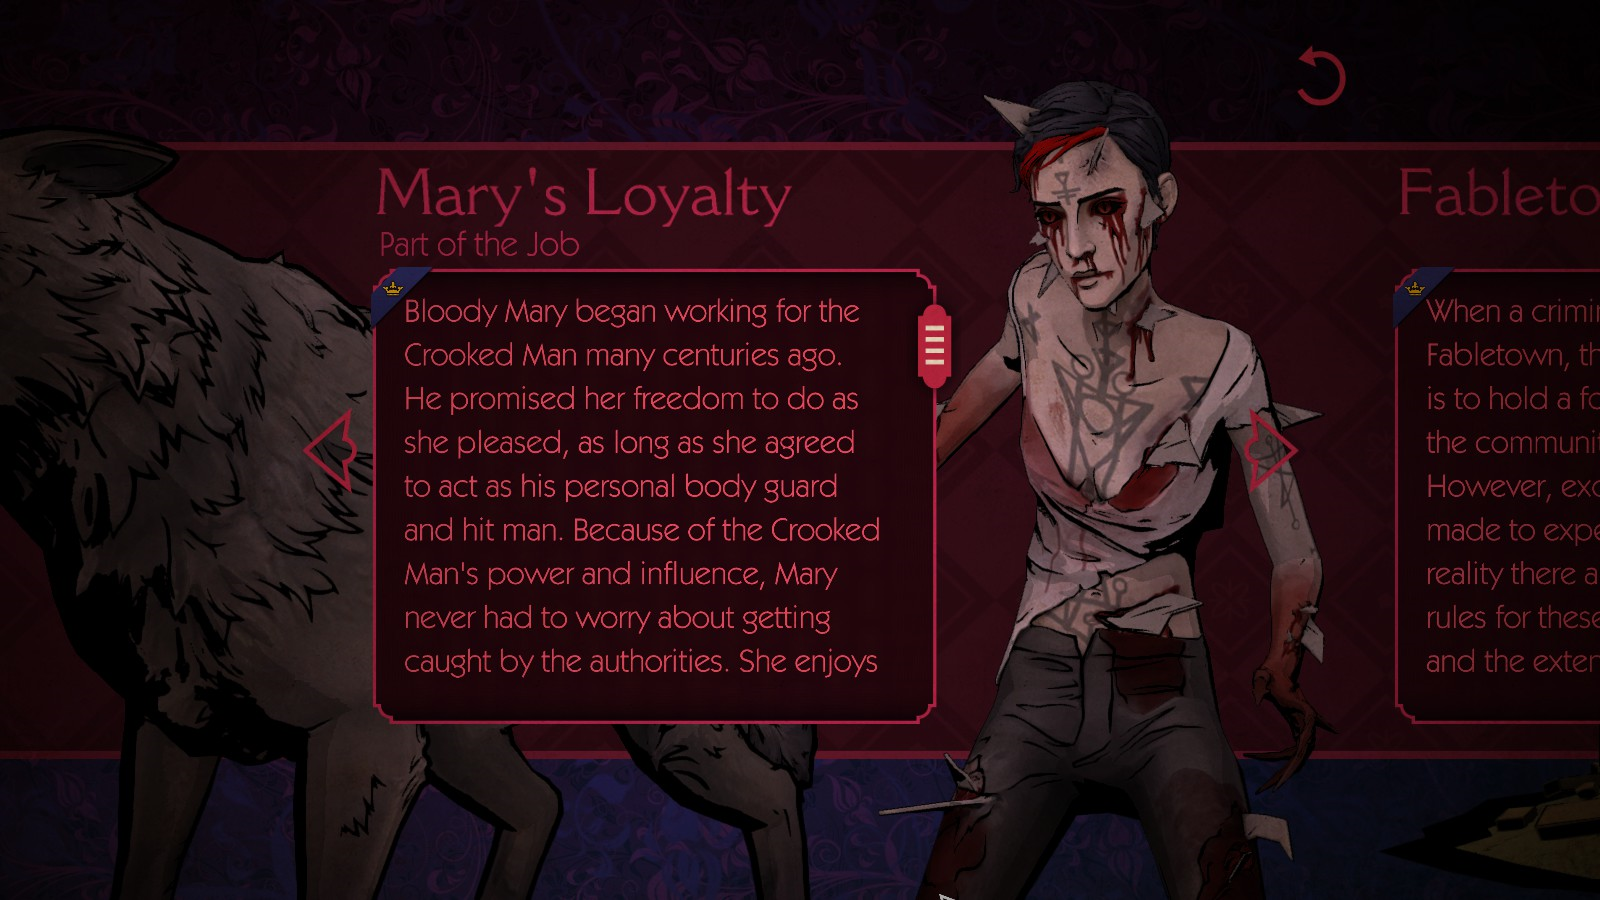 Bloody Mary began working for the Crooked Man many centuries ago. 